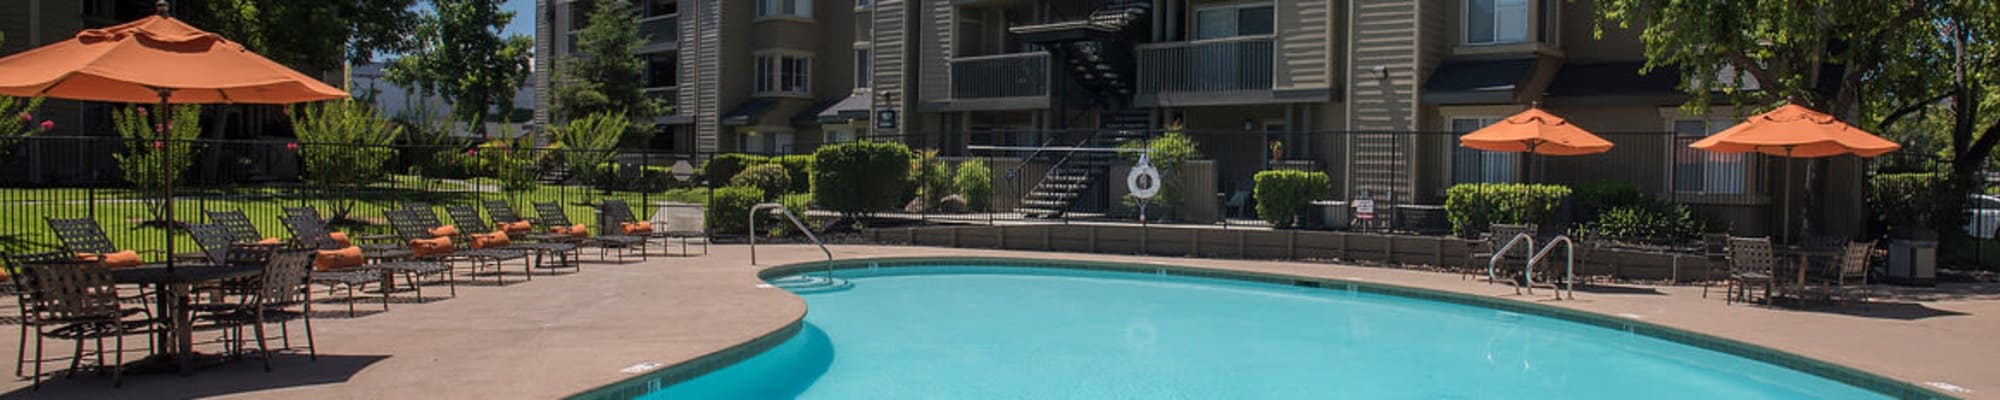 Amenities at Mill Springs Park Apartment Homes in Livermore, California